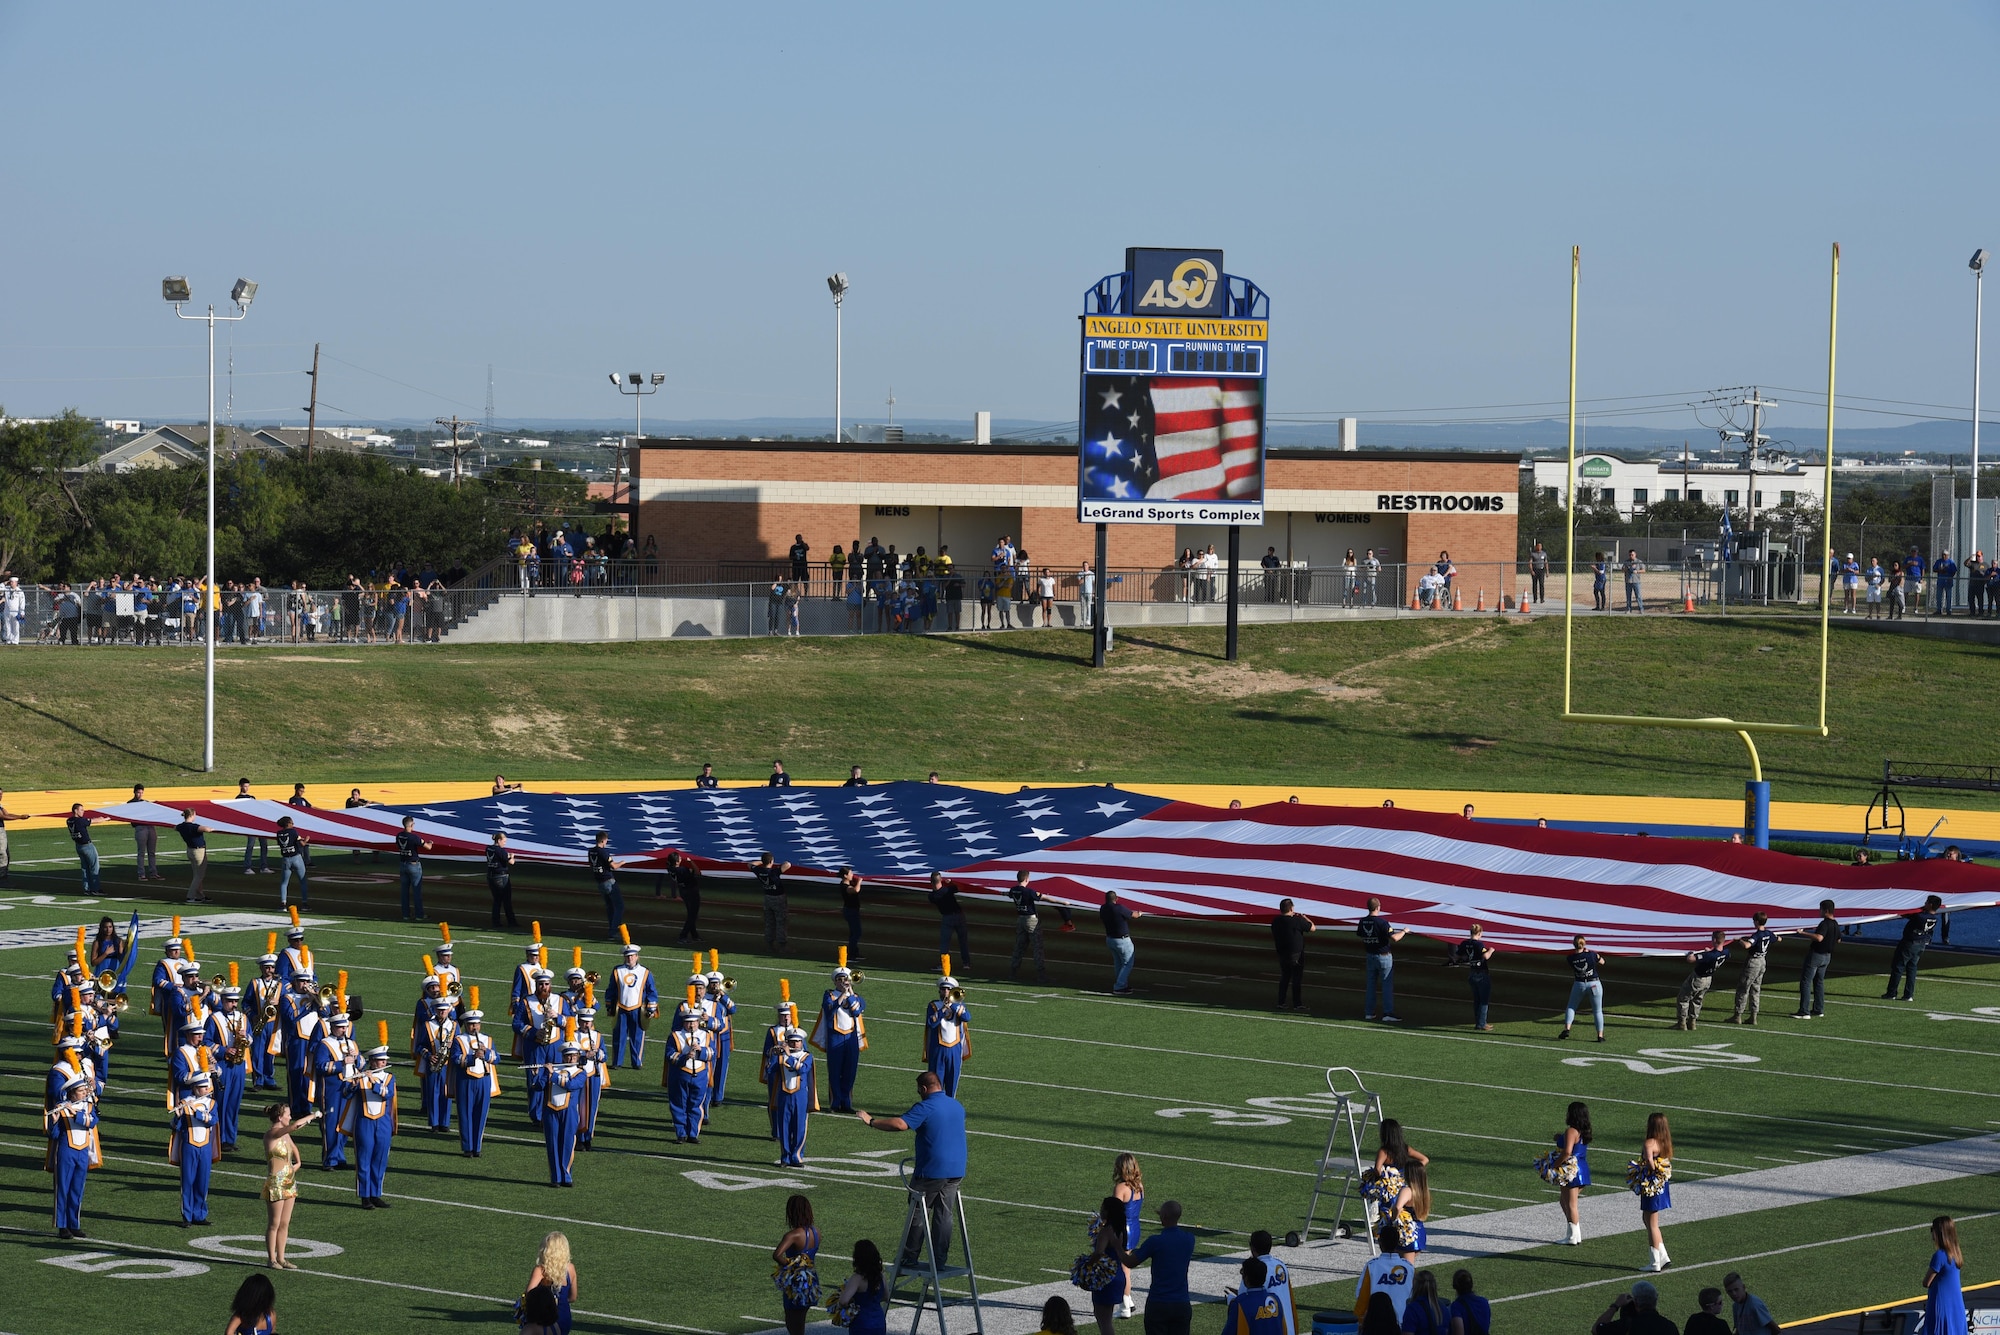 Angelo State University ROTC students unfold the American flag during the opening ceremonies of the Military Appreciation Day at LeGrand Stadium in San Angelo, Texas, Sept. 9, 2017. Along with the ceremonial unfolding of the flag the ROTC students also celebrated each touchdown with a run to the end zone and pushups. (U.S. Air Force photo by Airman Zachary Chapman/Released)